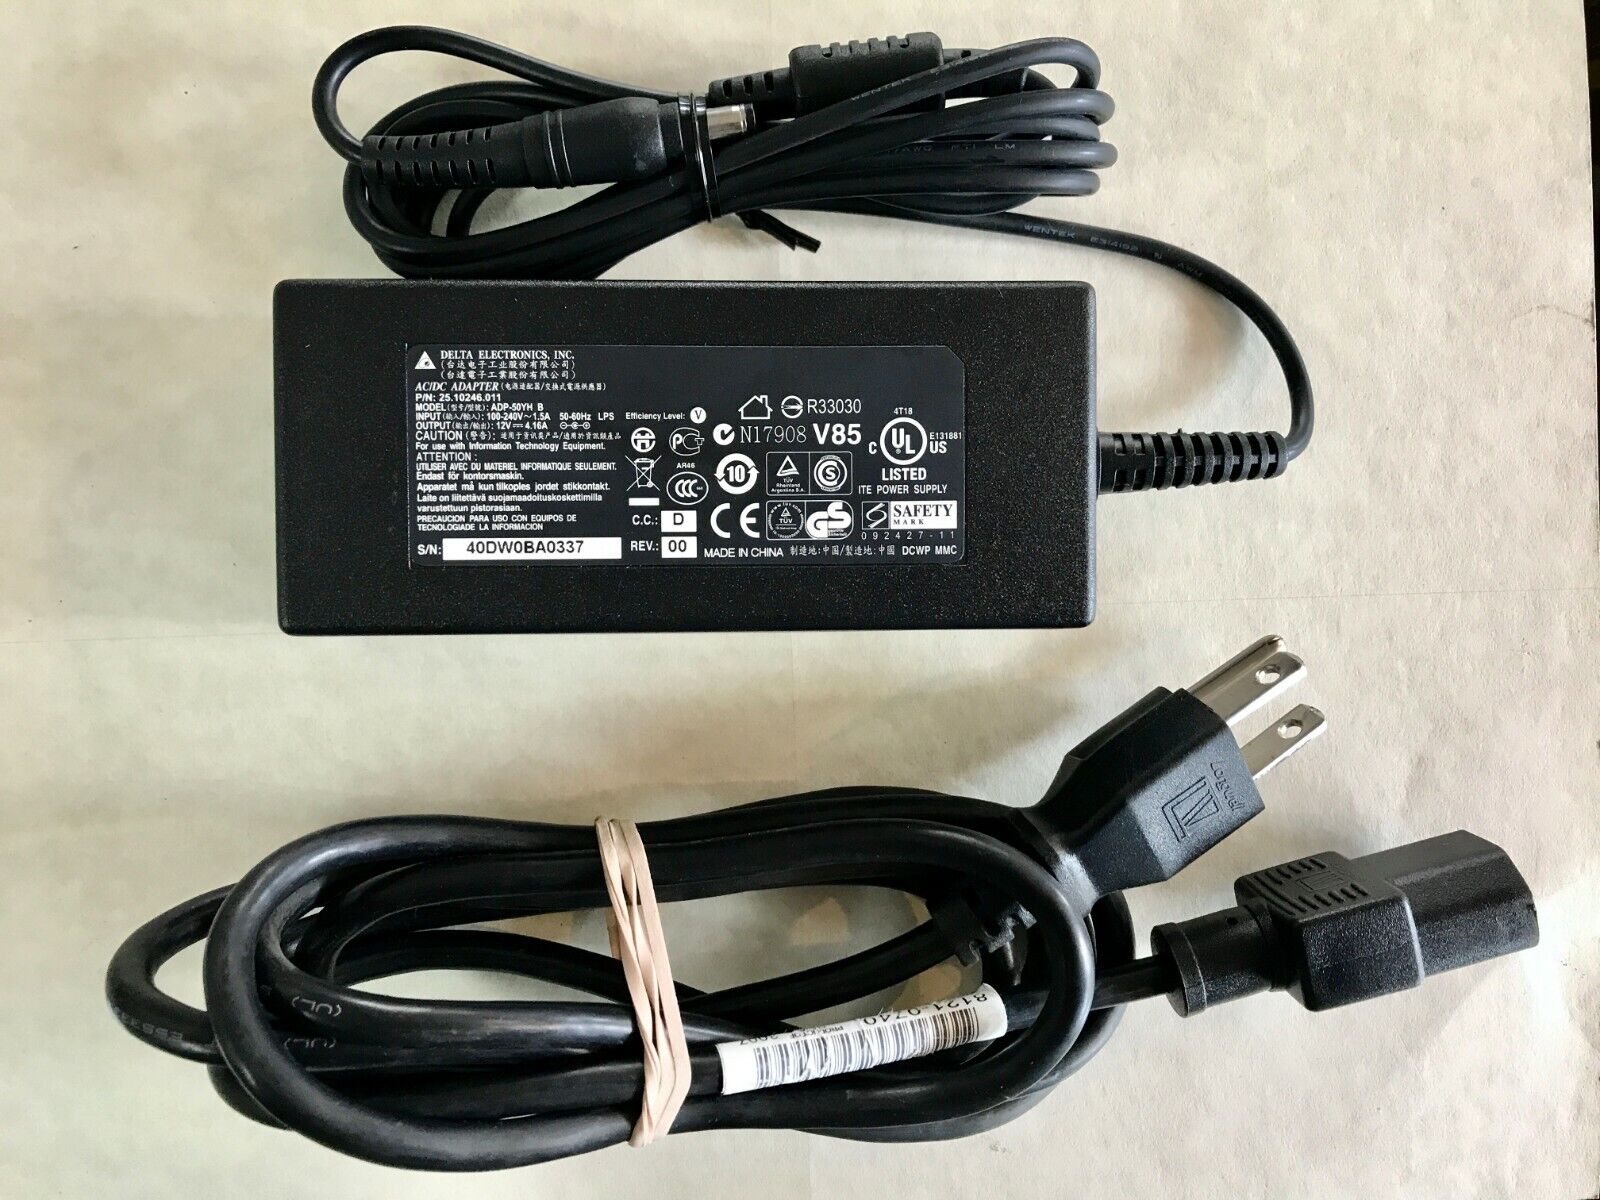 Delta Electronics AC Adapter N17908 V85 12V 4.16A New w/ Power Cable